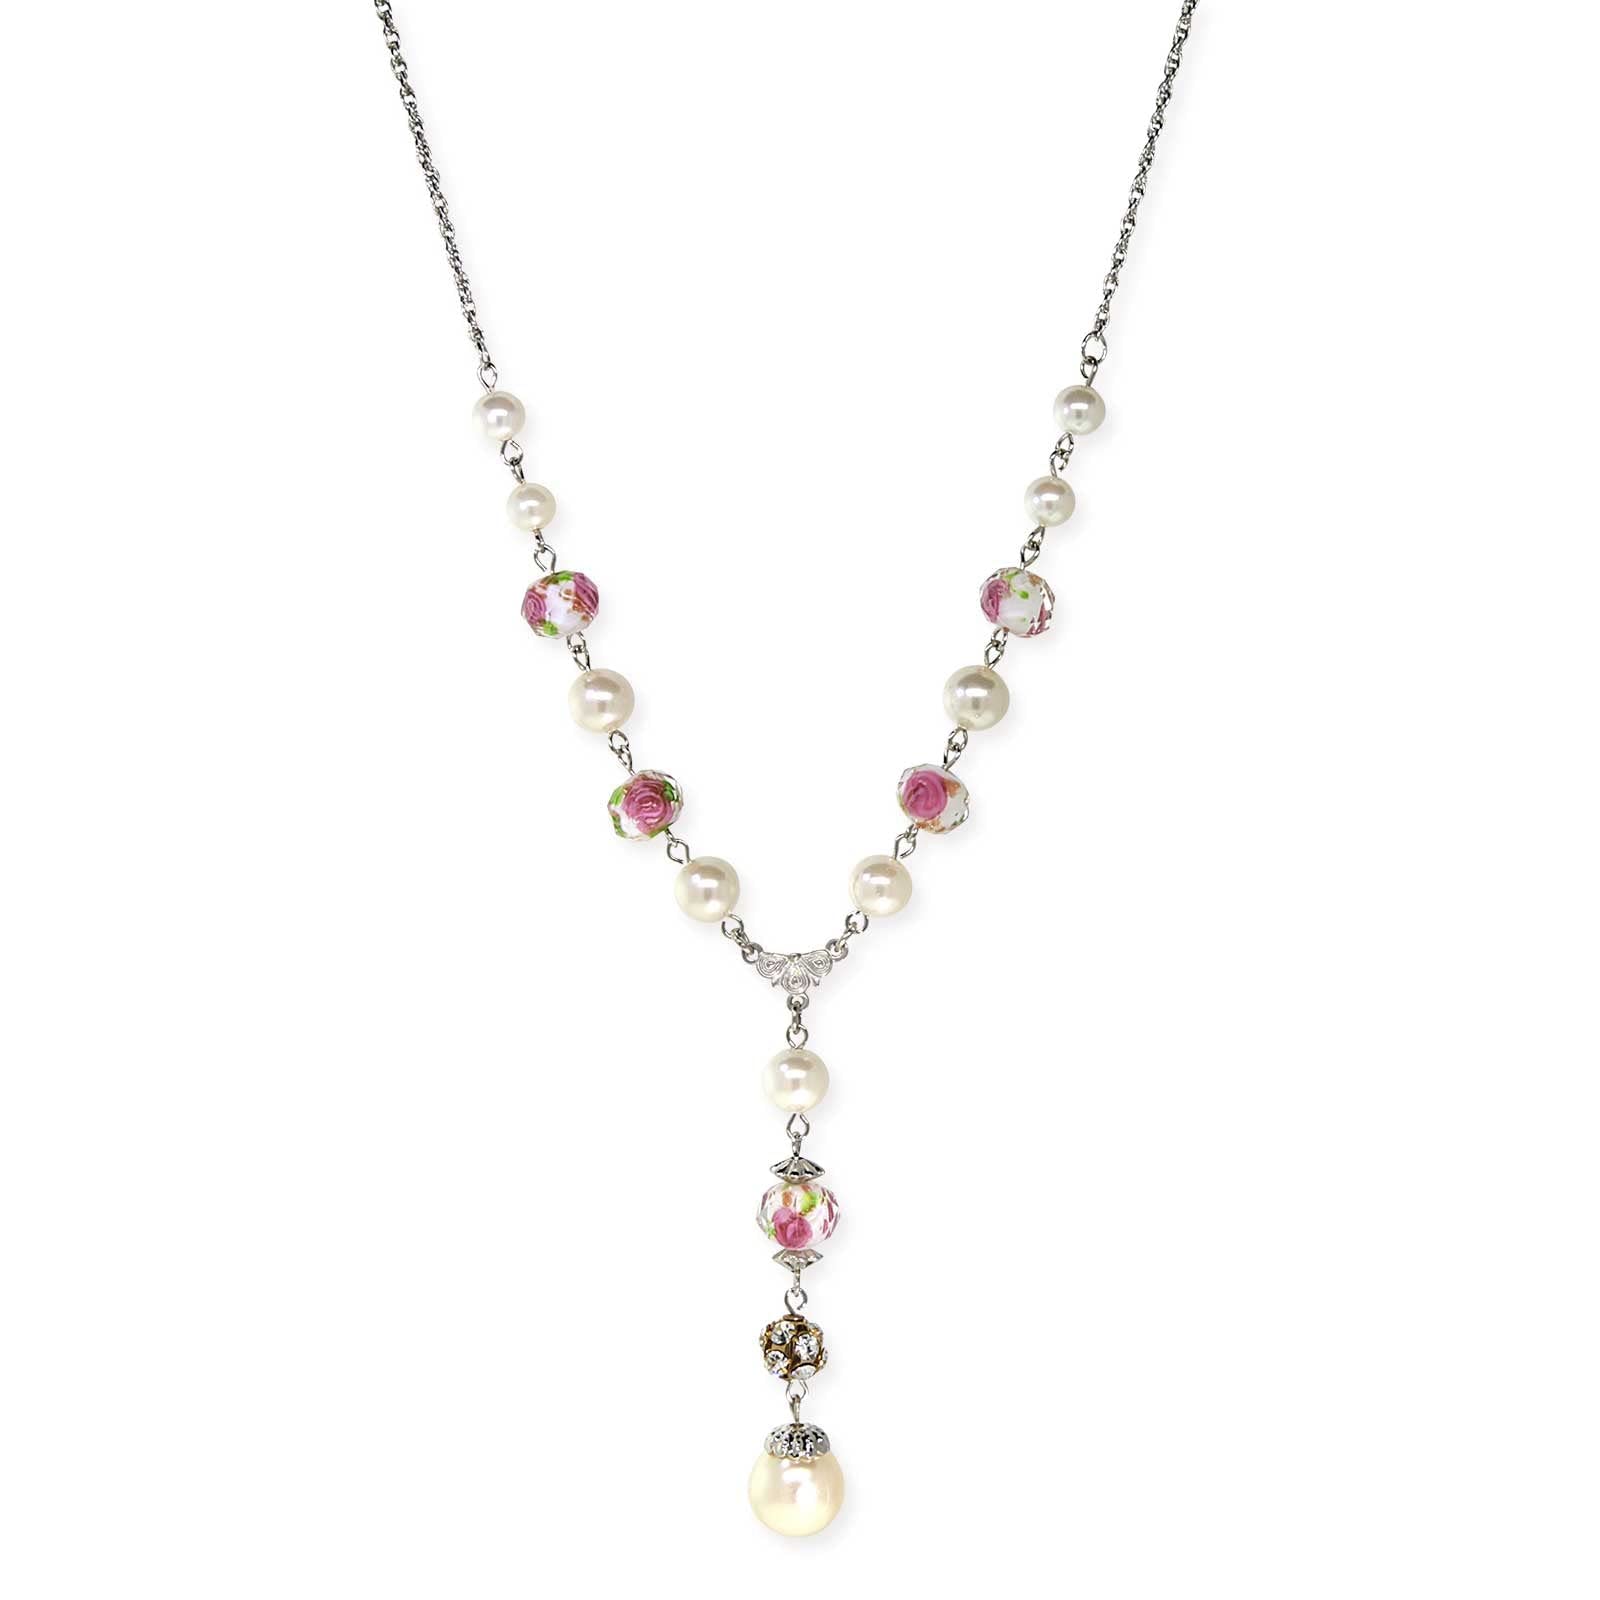 1928 Jewelry Pink Flower Bead Crystal Y-Necklace 16" + 3" Extender - image 2 of 3